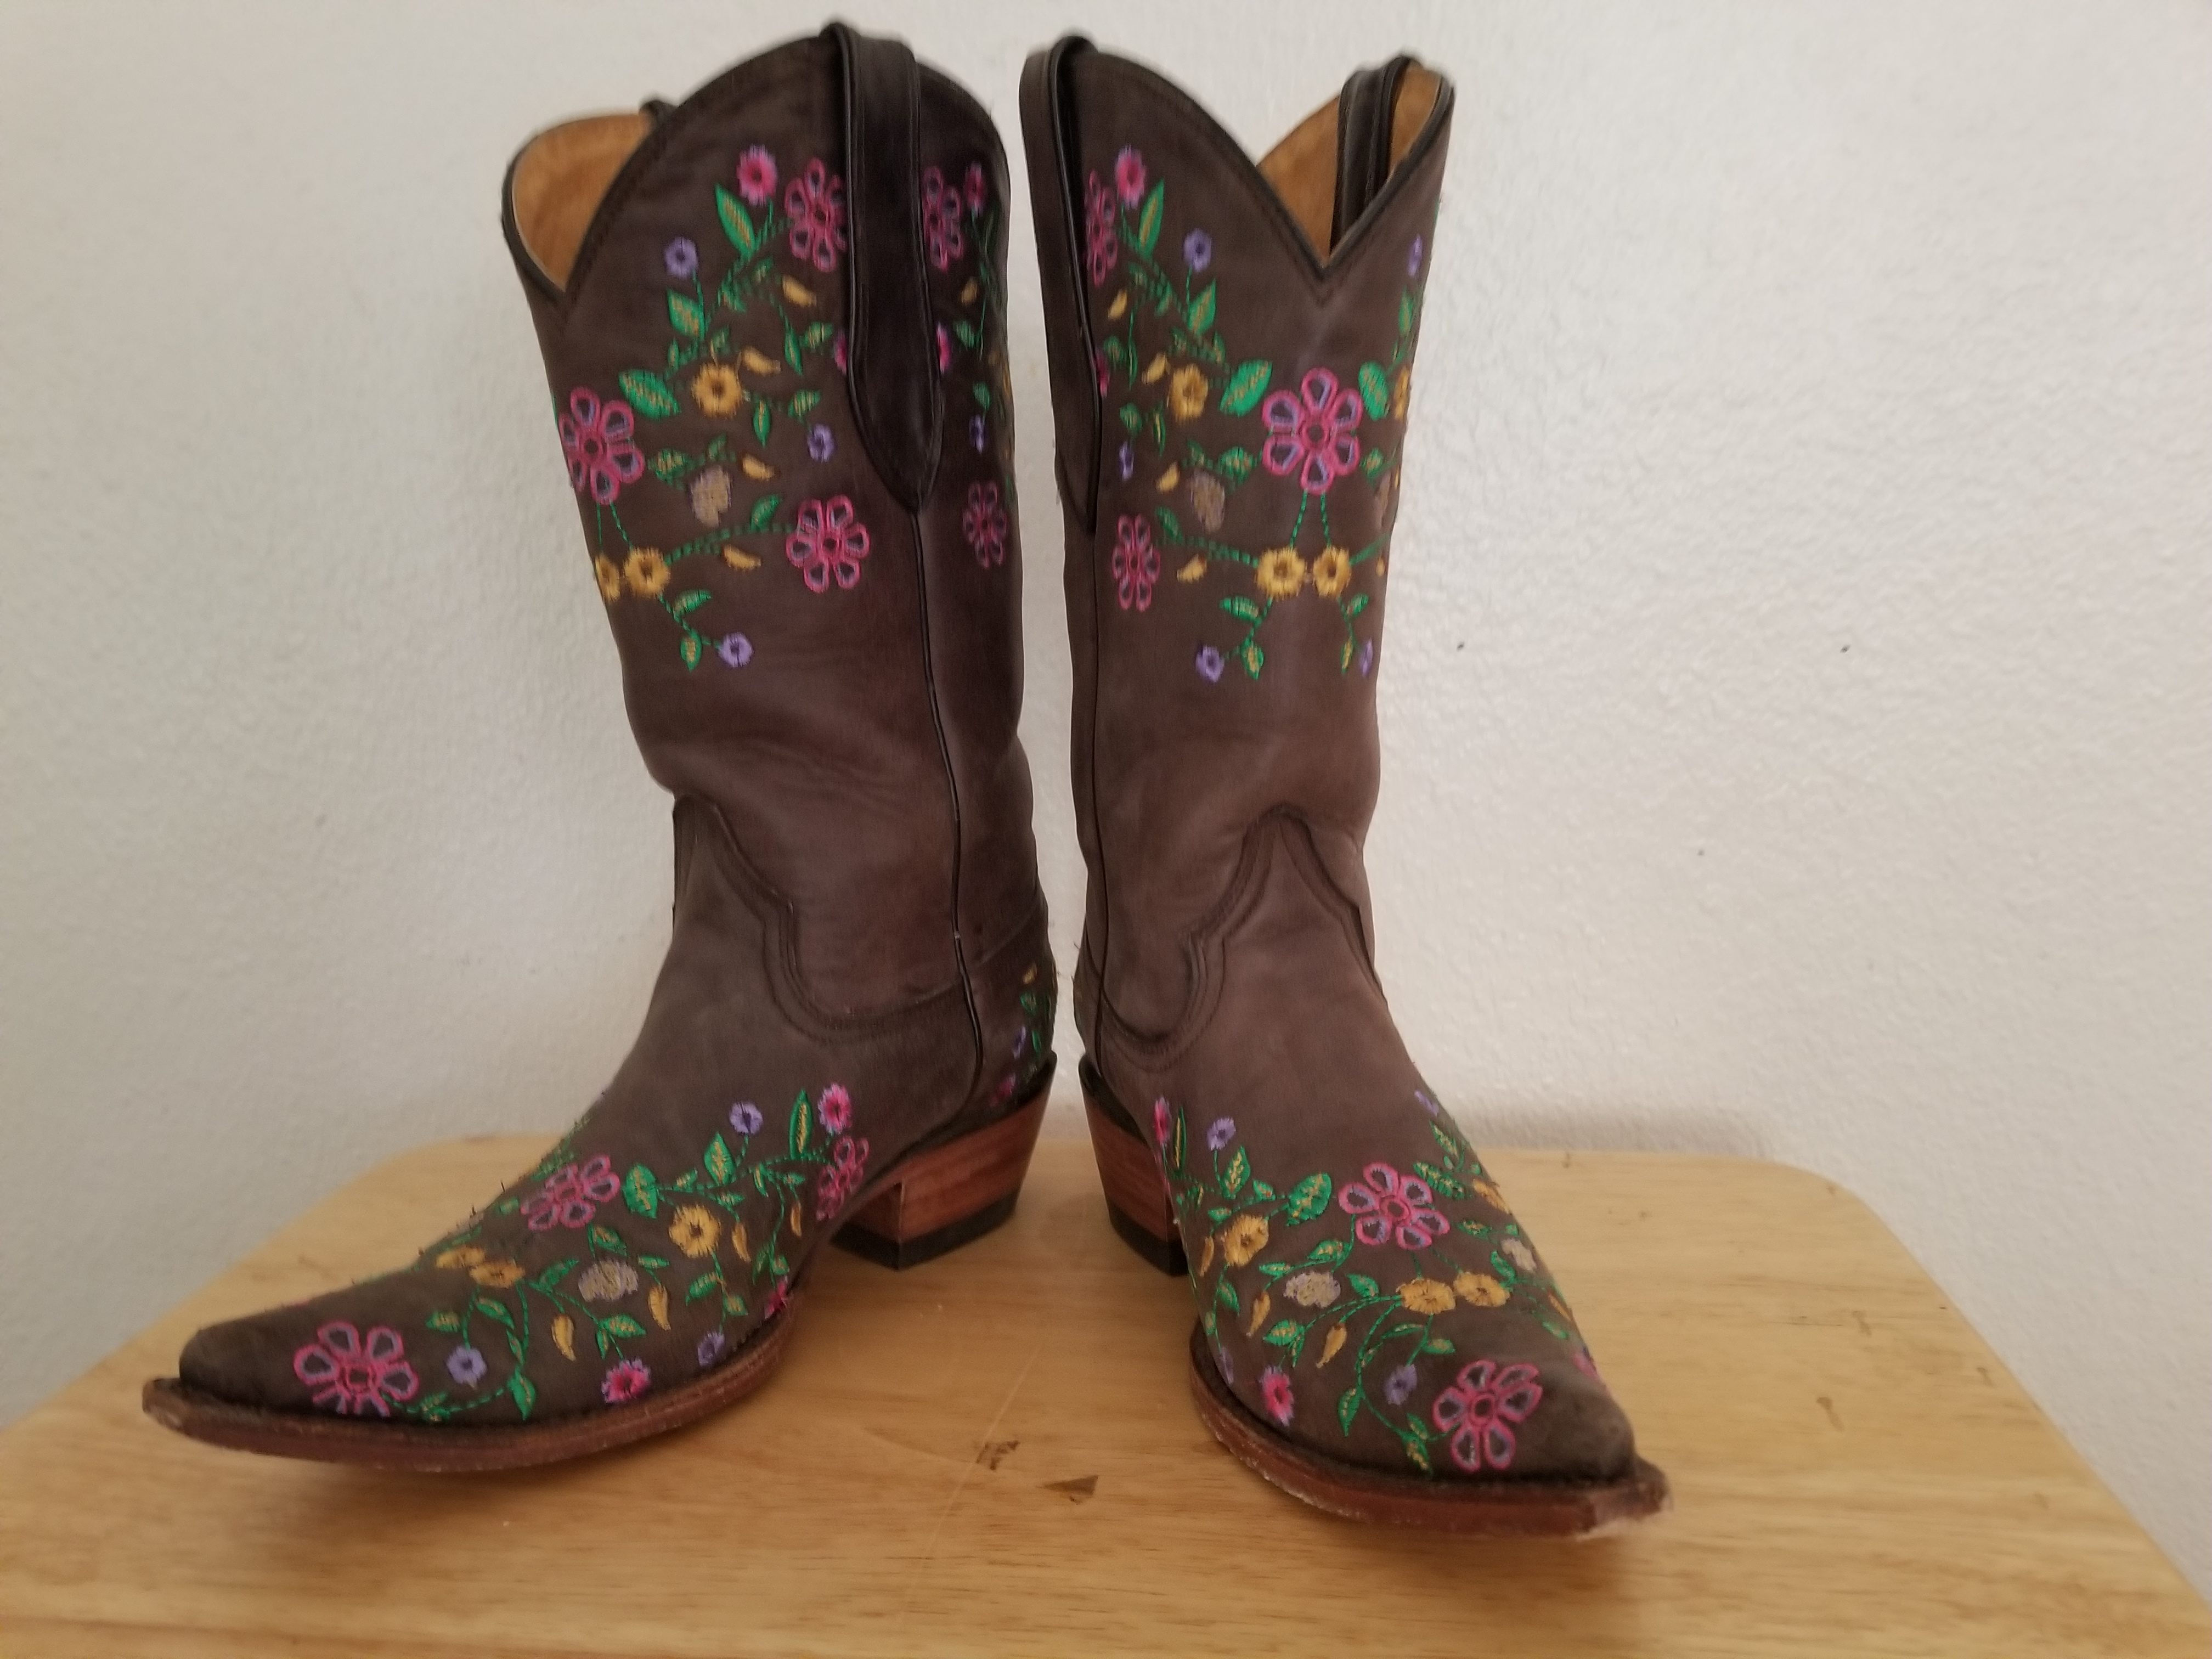 embroidered boots 2018